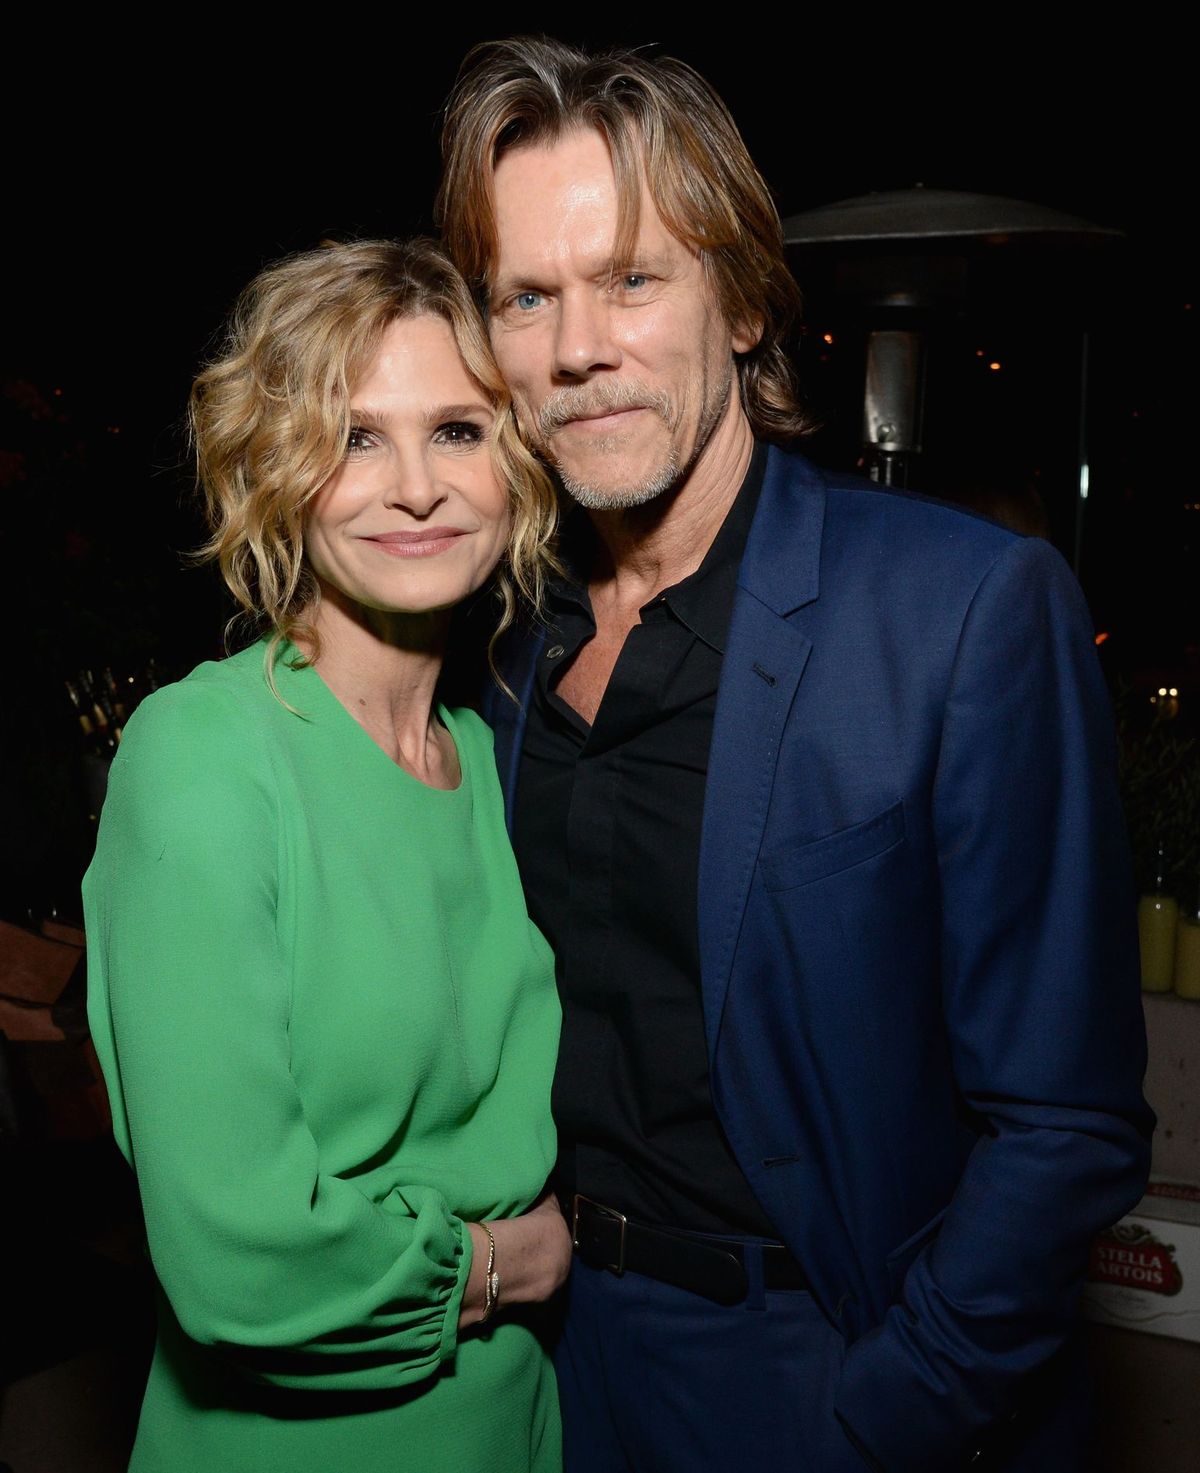 Kyra Sedgwick and Kevin Bacon at Moet Celebrates The 75th Anniversary of The Golden Globes Award Season on November 15, 2017, in West Hollywood, California | Photo: Michael Kovac/Getty Images